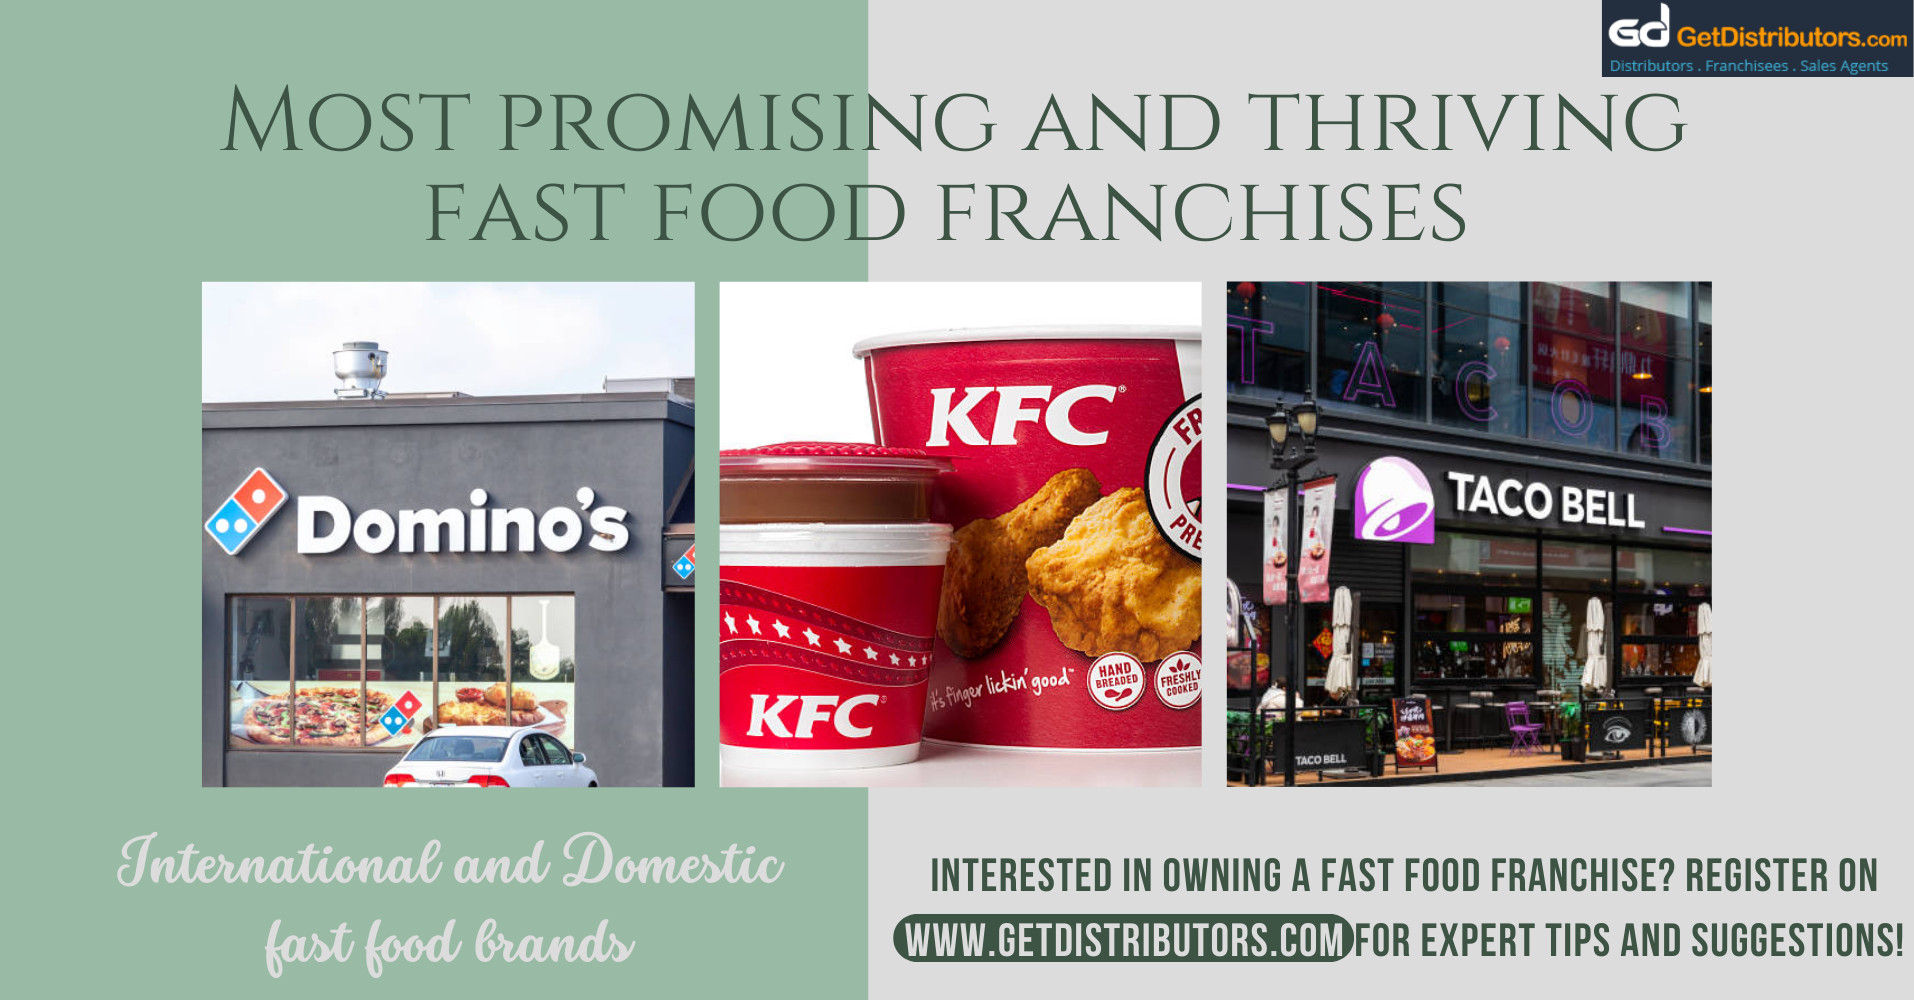 Most promising and thriving fast food franchises to consider